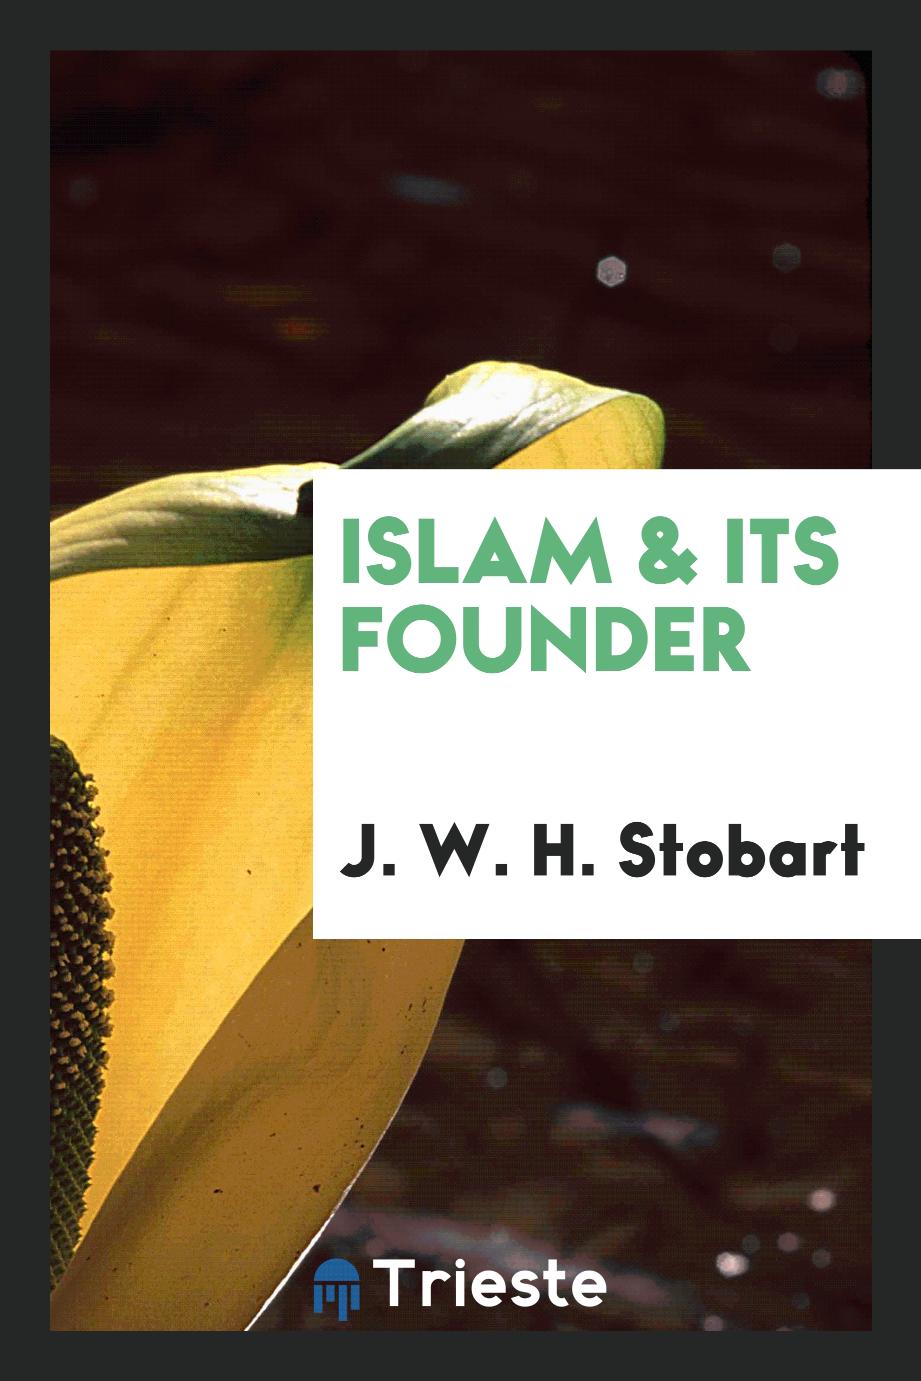 Islam & its founder